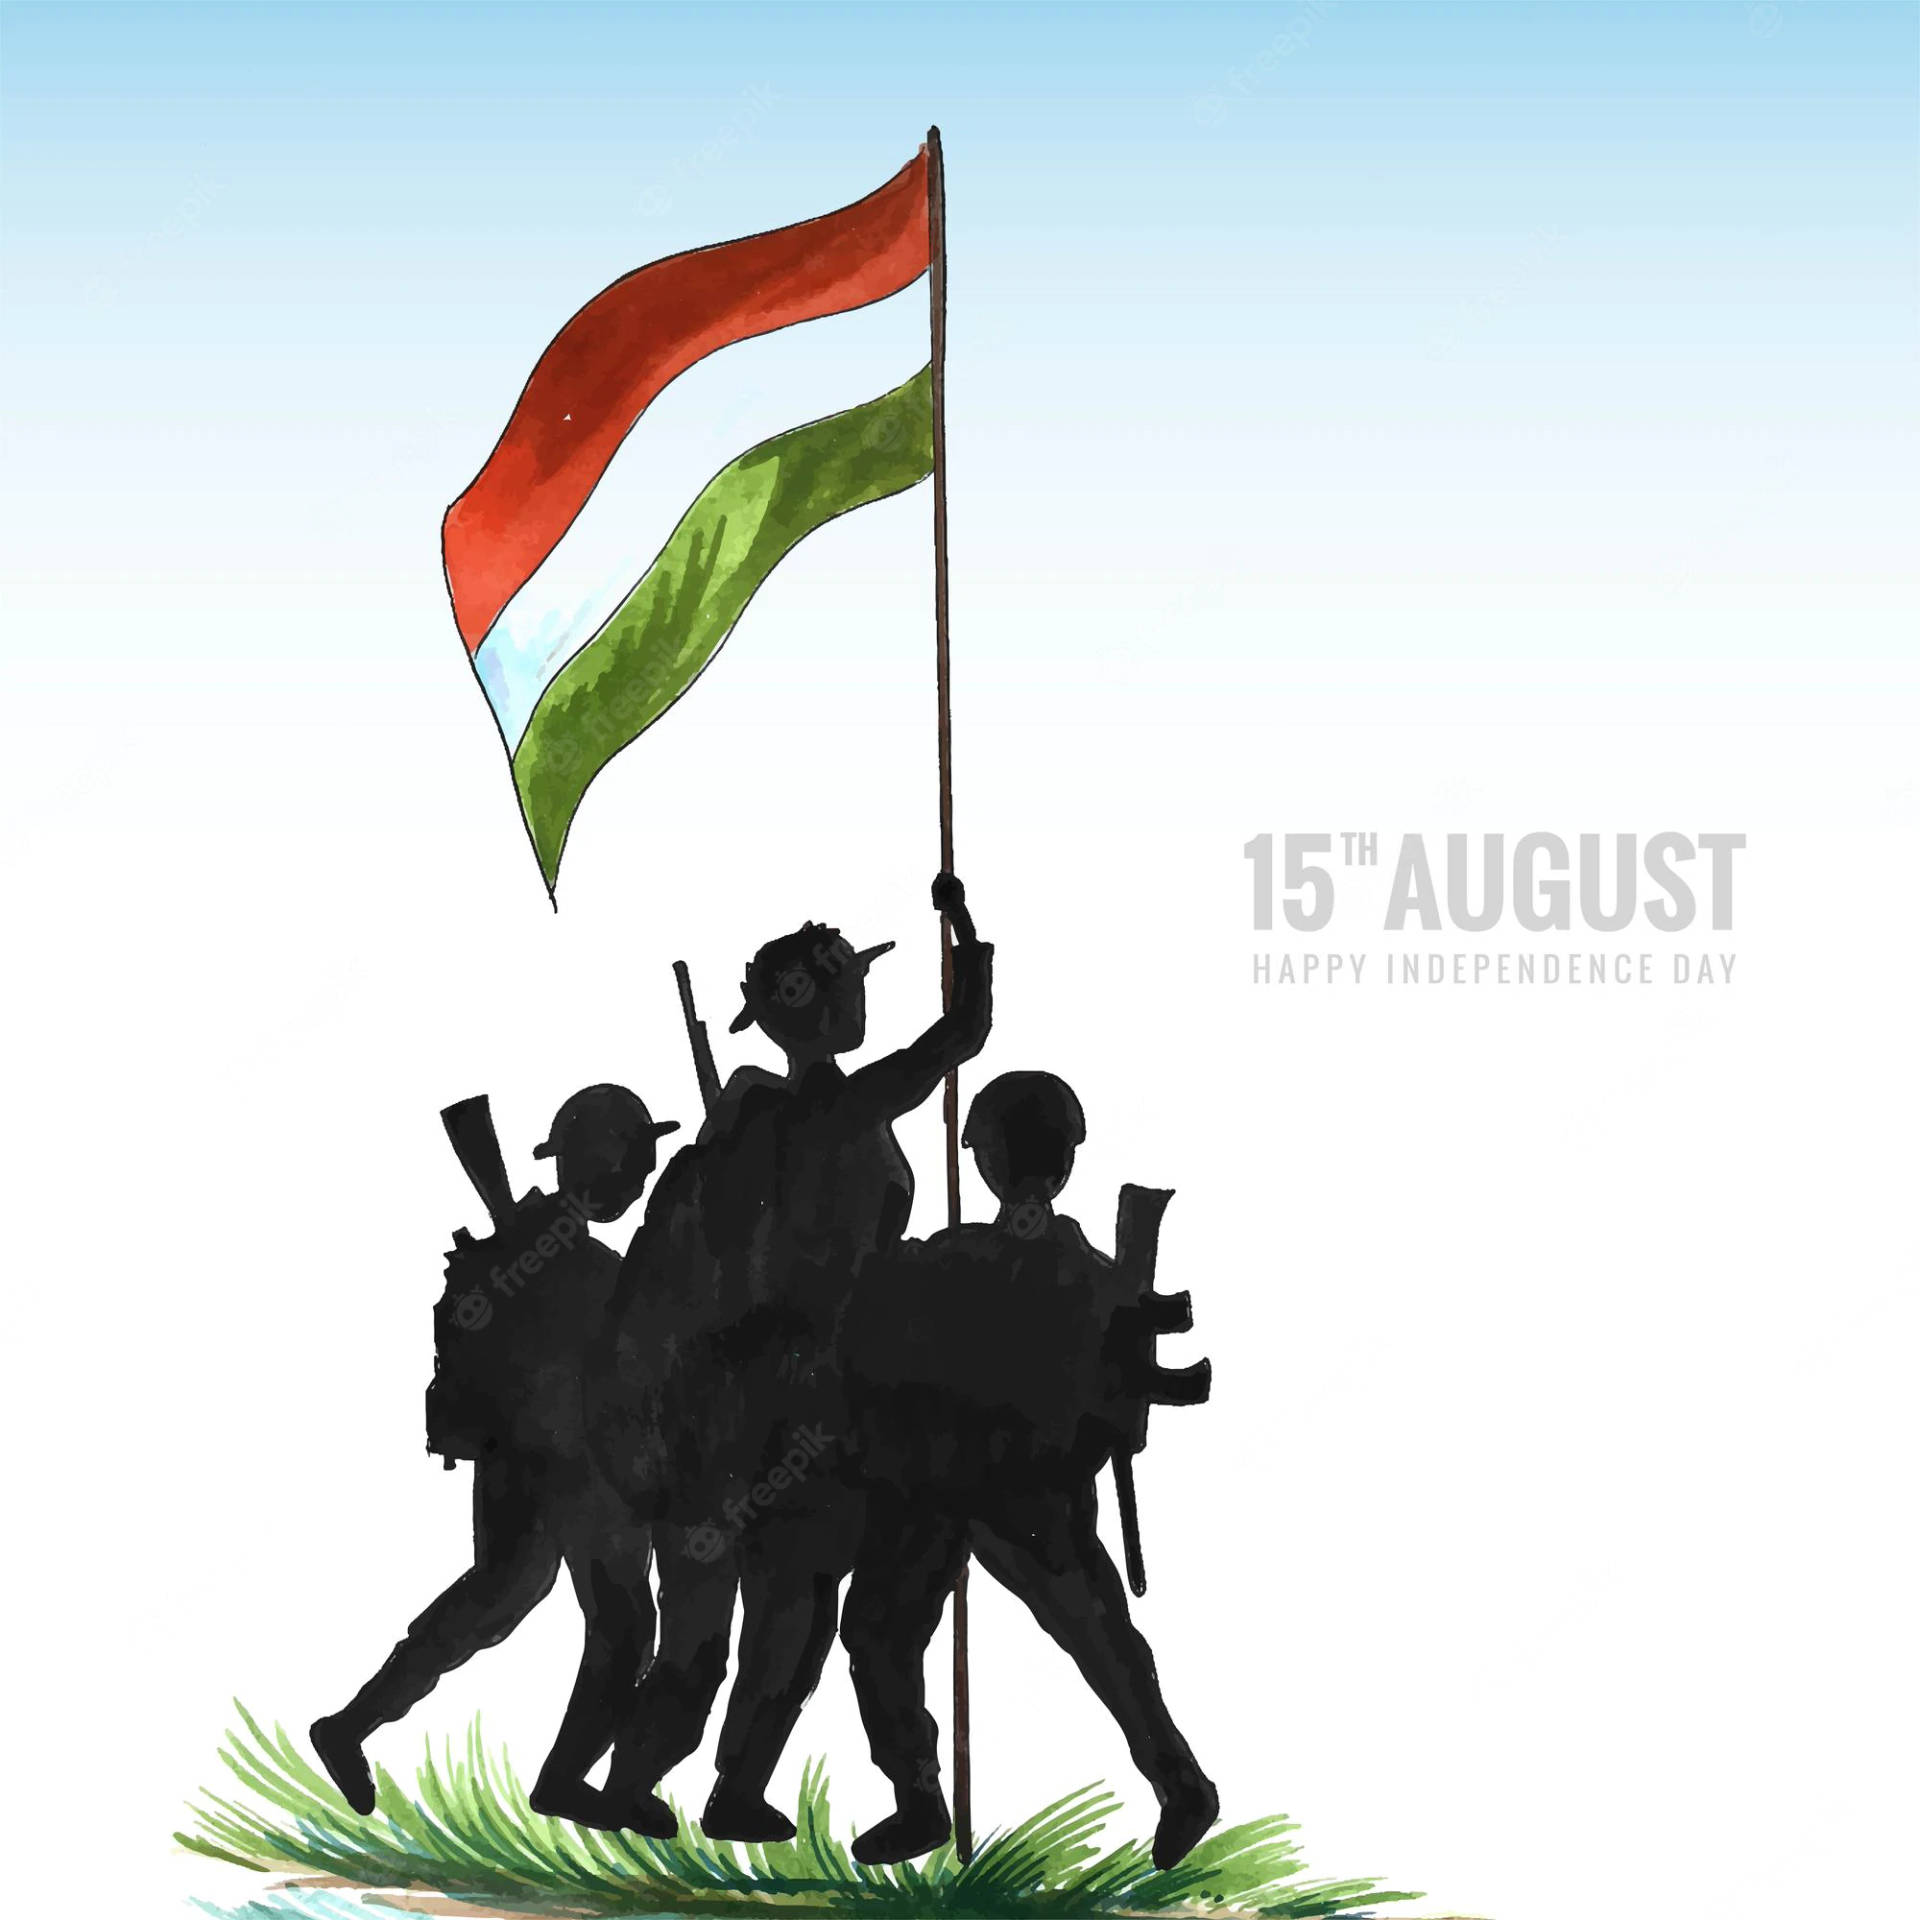 Download Indian Soldiers Independence Day Cartoon Wallpaper 